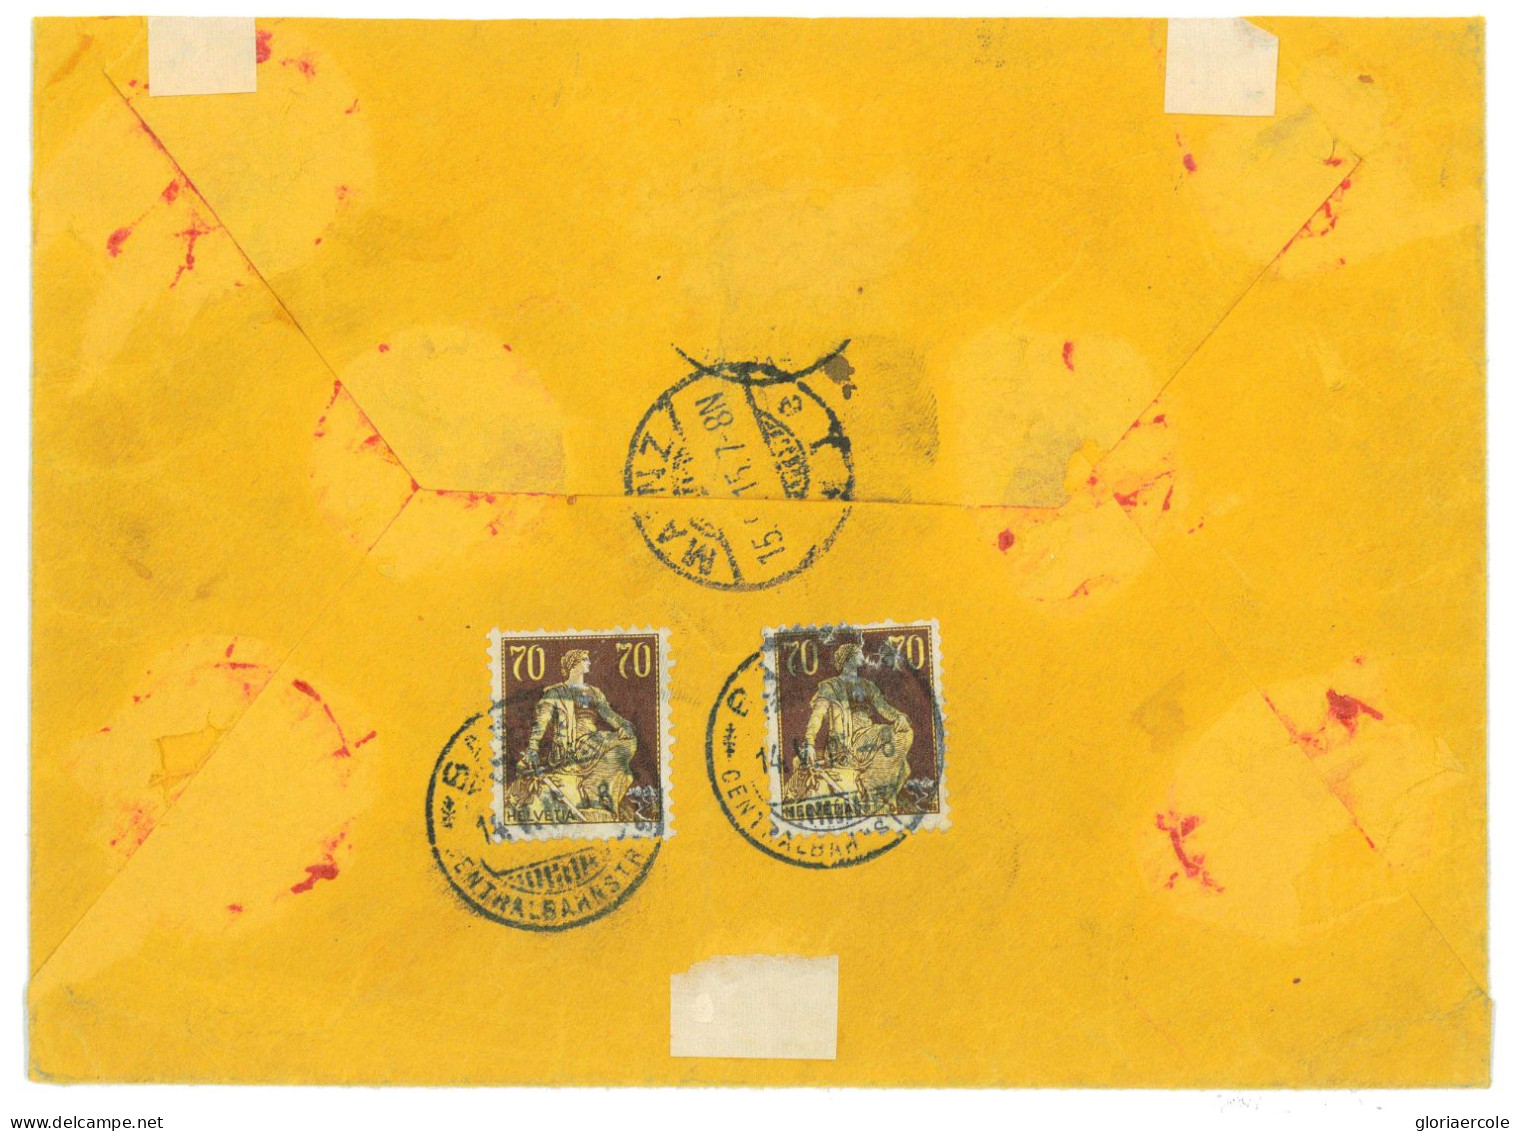 P3095 - SWITZERLAND NICE REGISTRED AND EXPRESS LETTER FROM BASEL, BEARING THE 10 FRANKS DEFINITIVE SBHV 131 ON THE FRONT - Briefe U. Dokumente